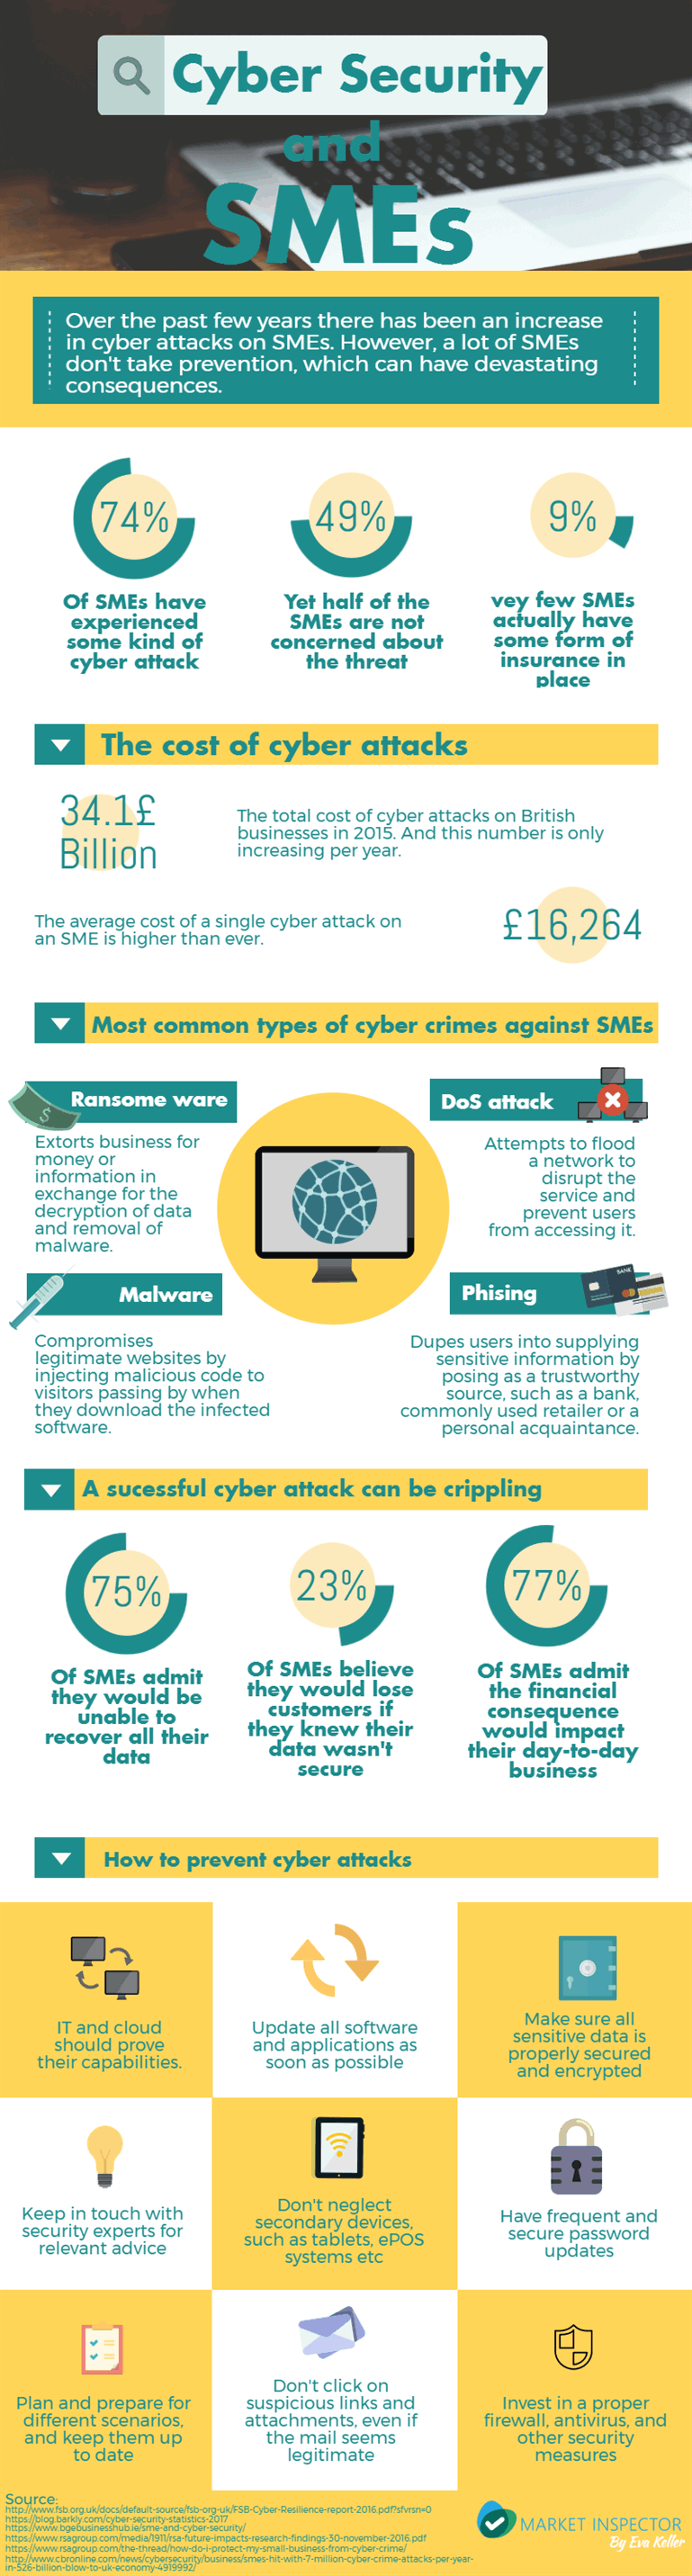 Cybersecurity for SMEs